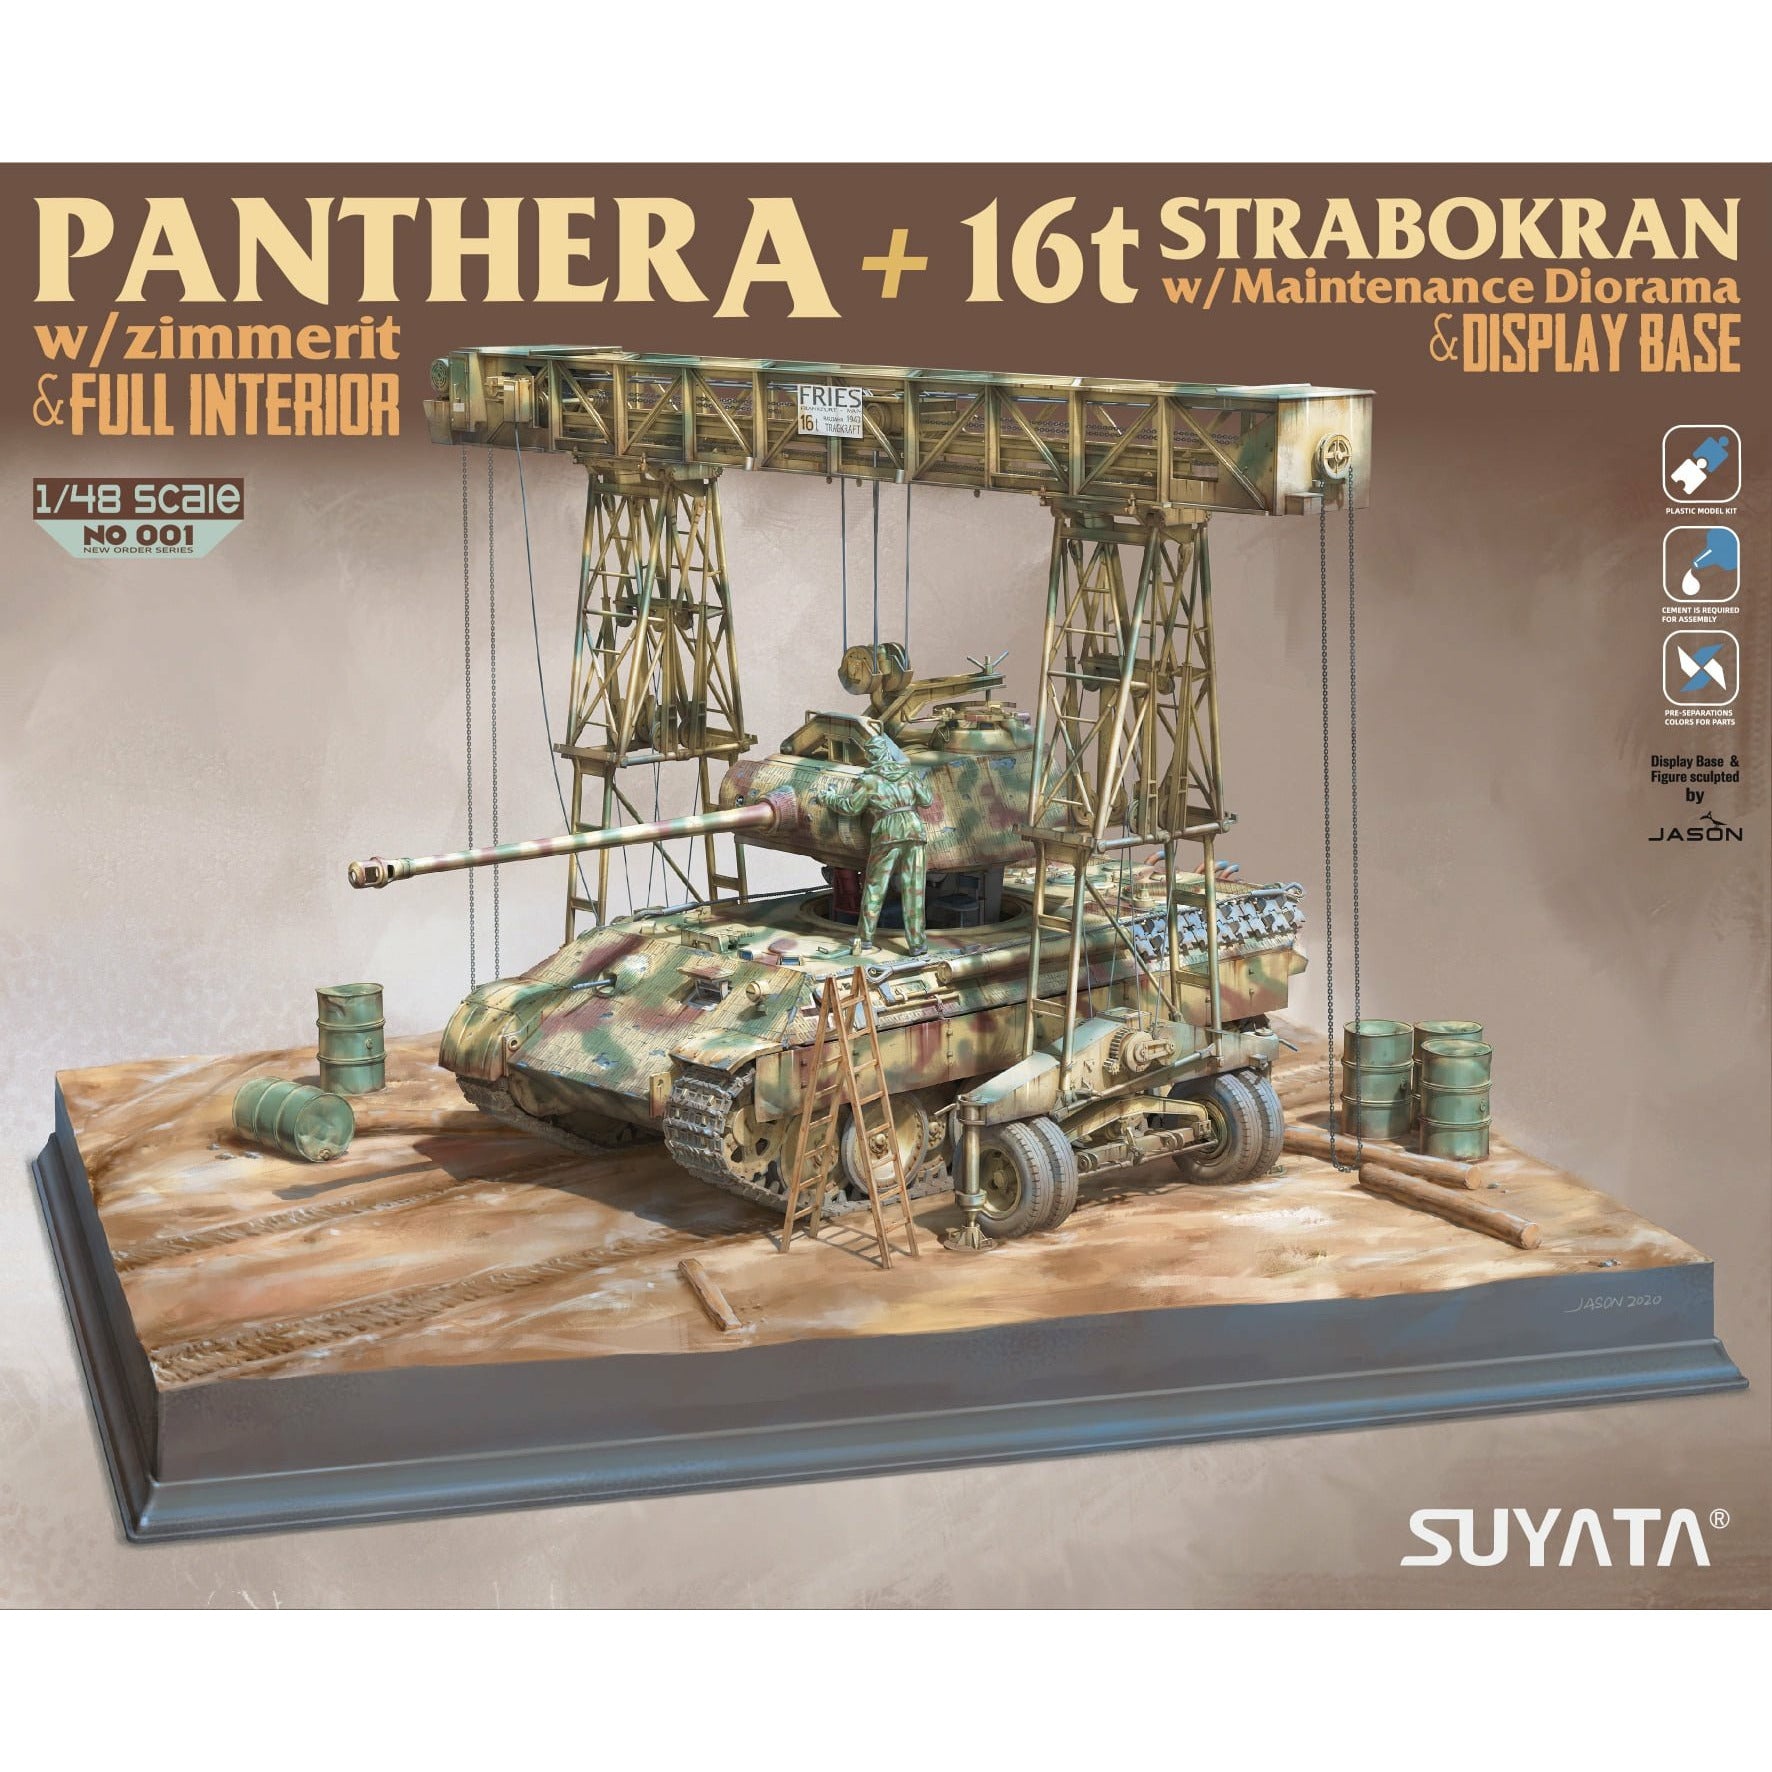 Panther A w/ Zimmerit & Full Interior 16t Strabokran w/ Maitenance Diorama and Display Base 1/48 #001 by Suyata